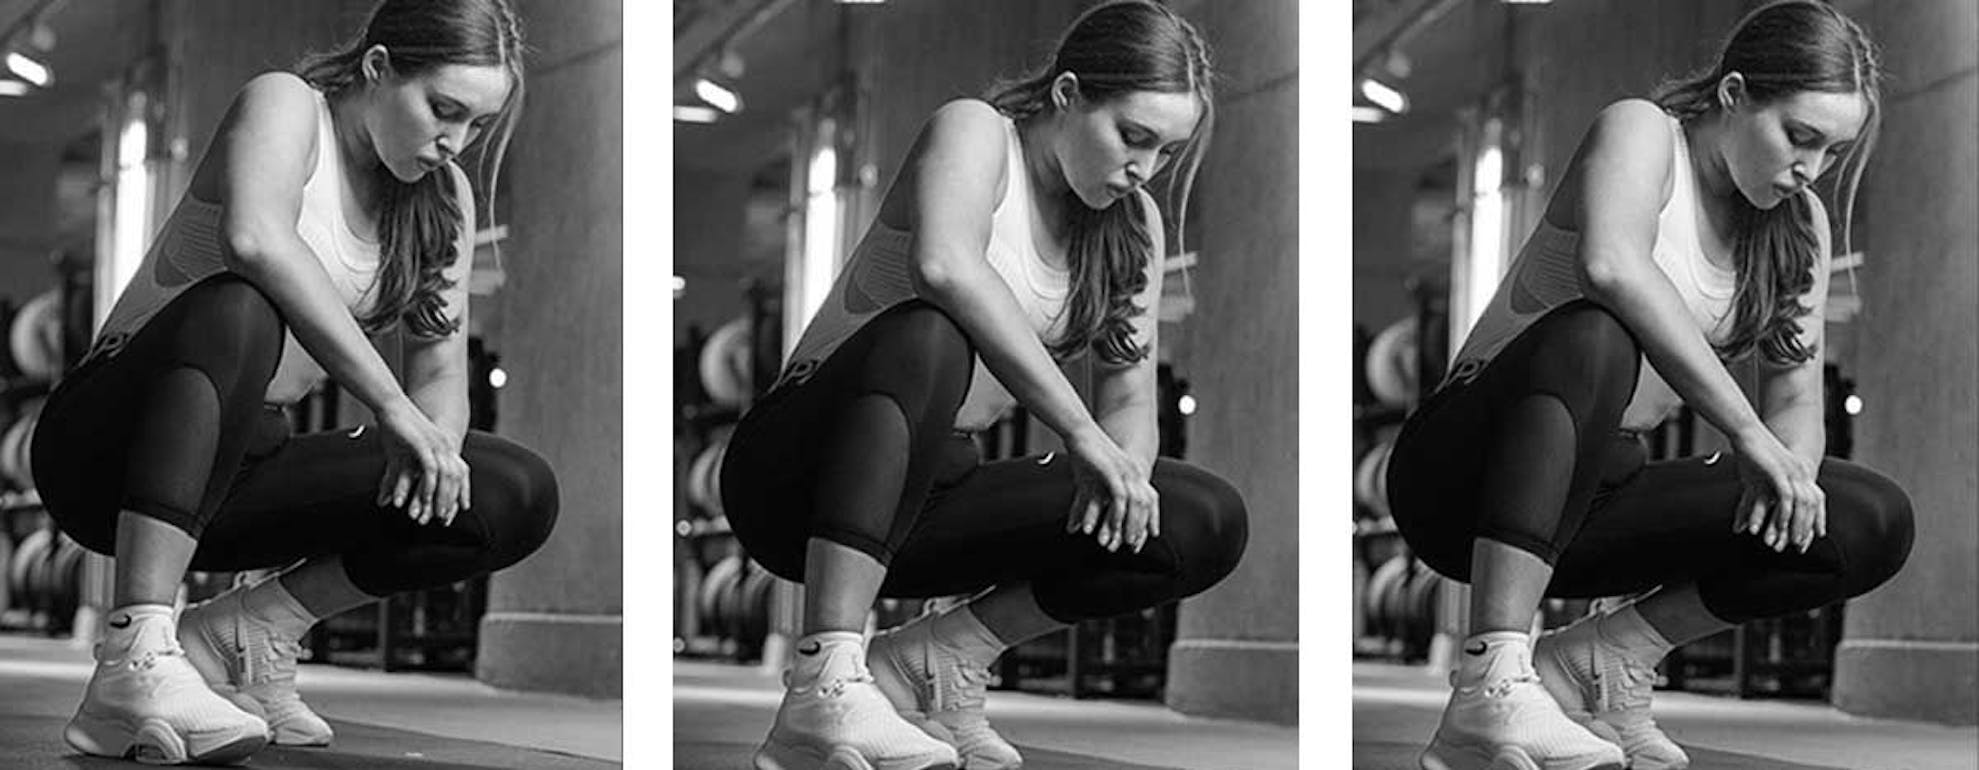 hiit-workout-at-home-with-pt-roz-purcell-session-3